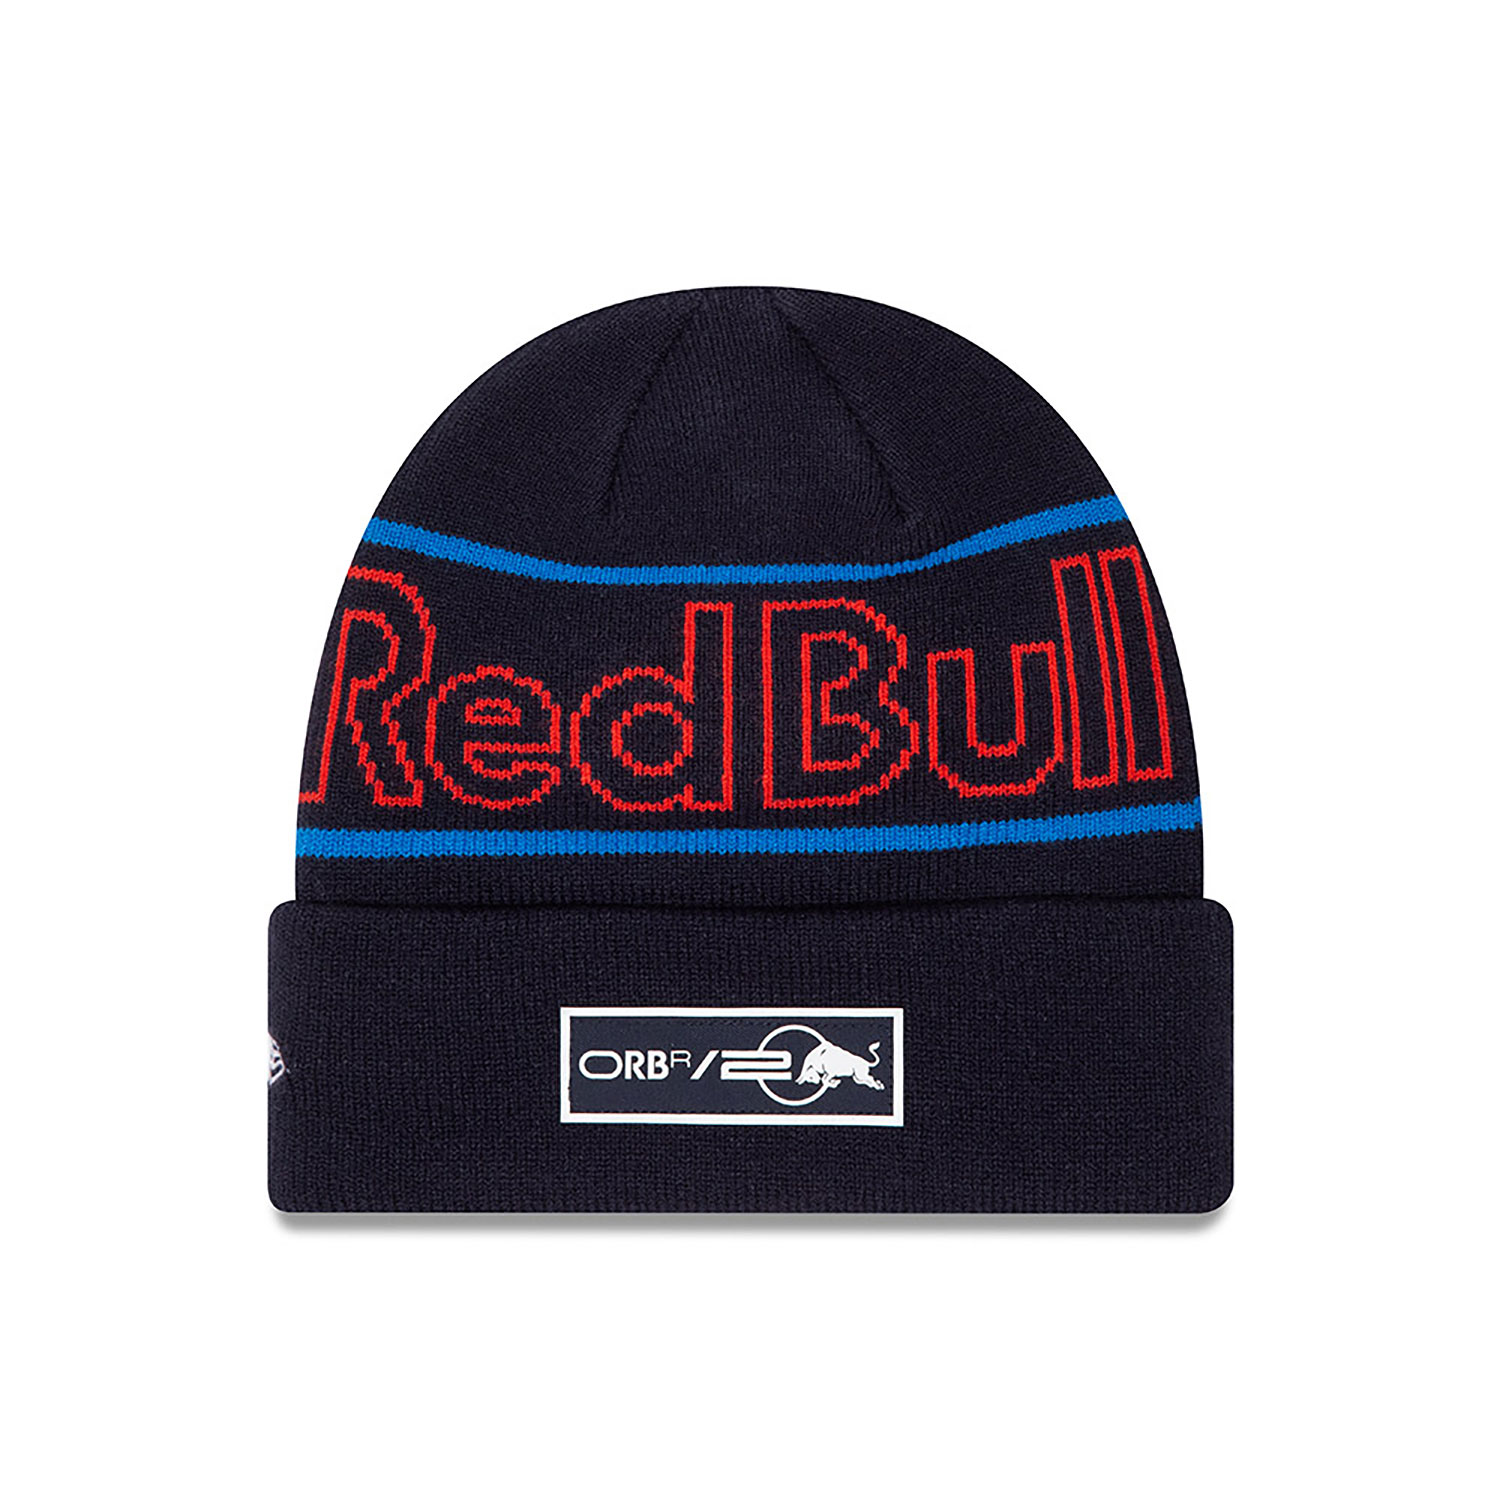 Red Bull Racing Youth Team Navy Cuff Knit Beanie Hat